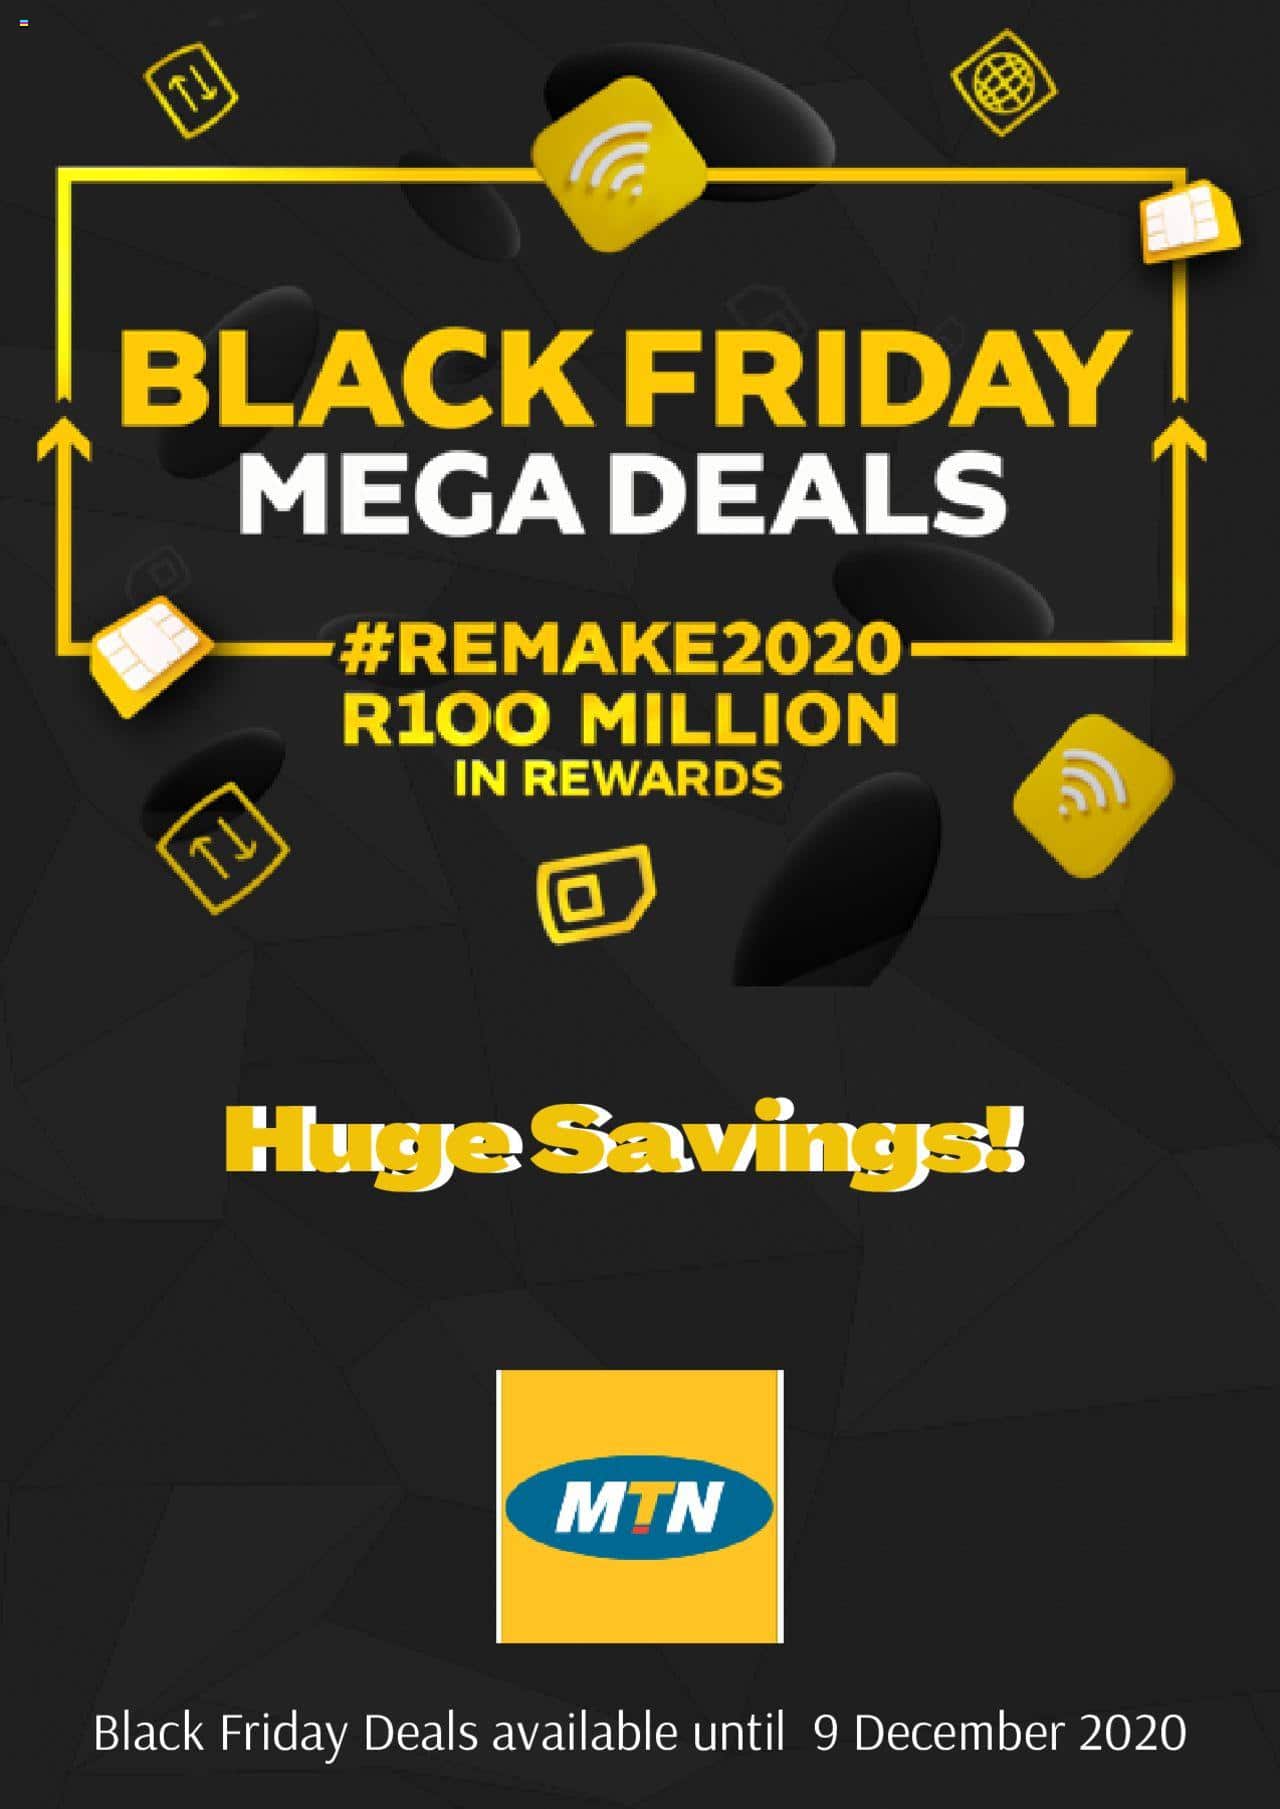 MTN Black Friday Deals & Specials 2021 - What Is Figs Black Friday Deal